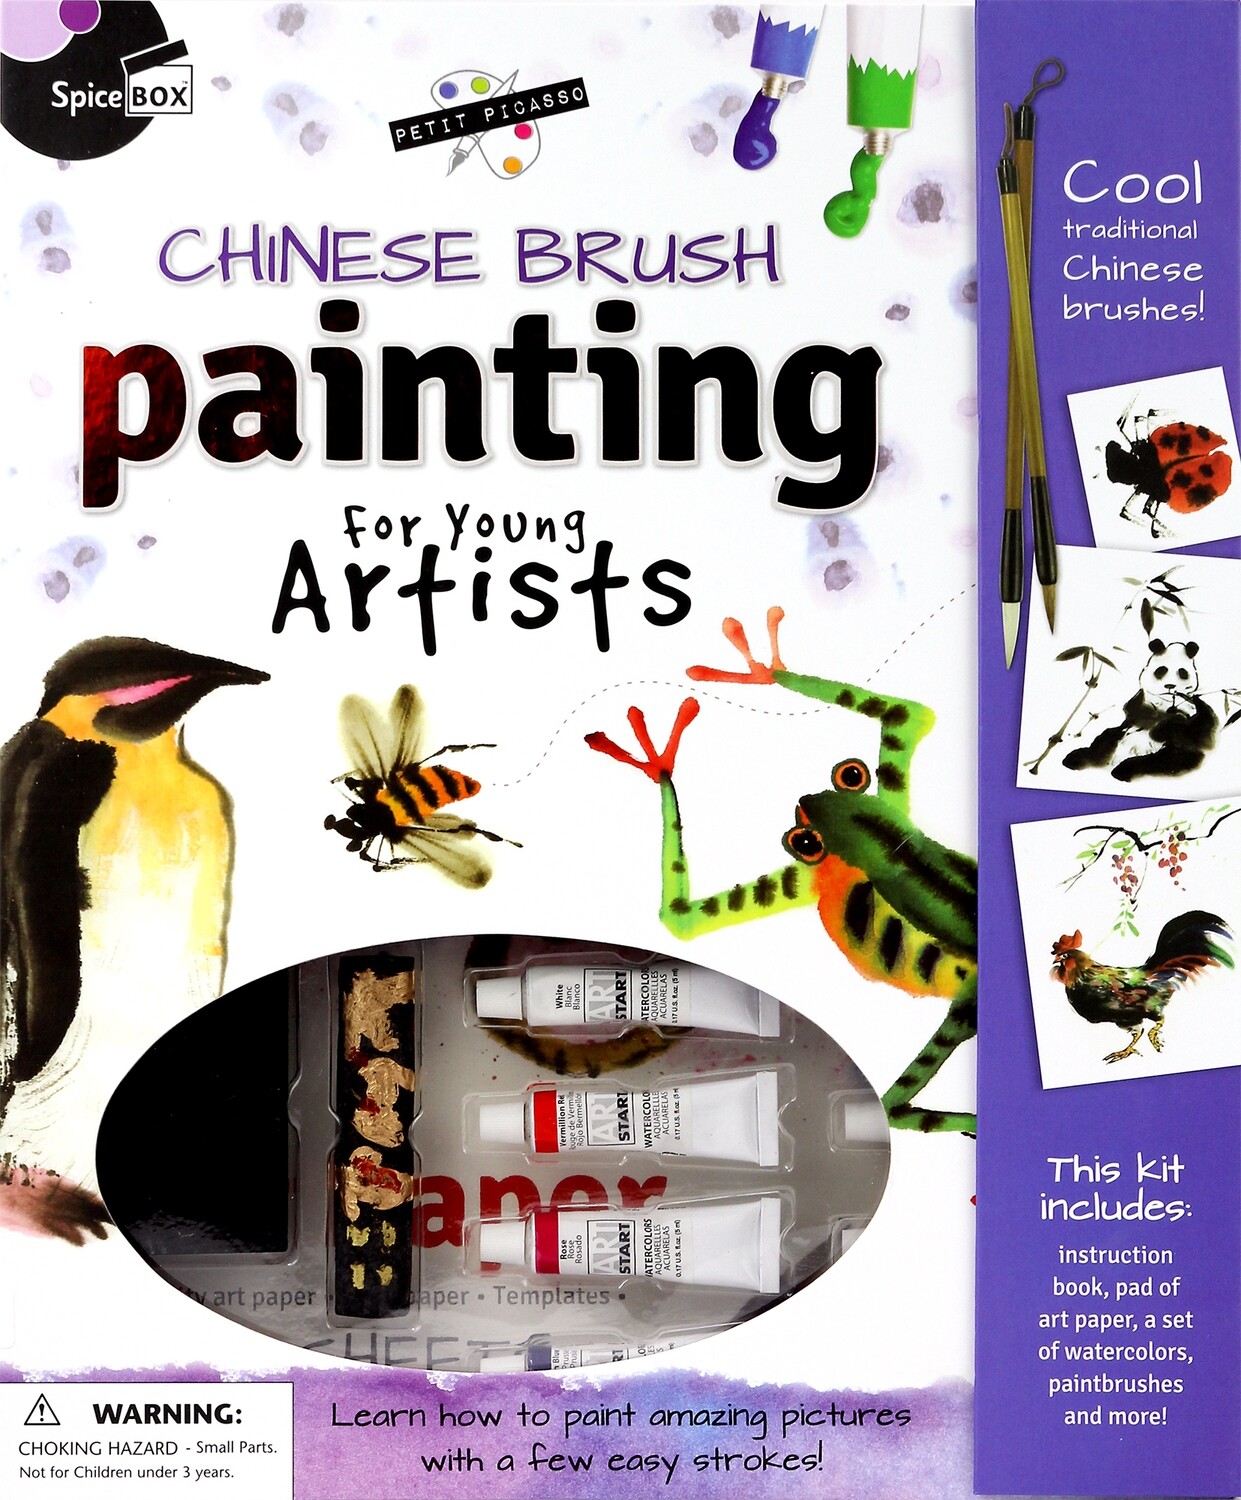 Book Kit: Petit Picasso Chinese Brush For Young Artists